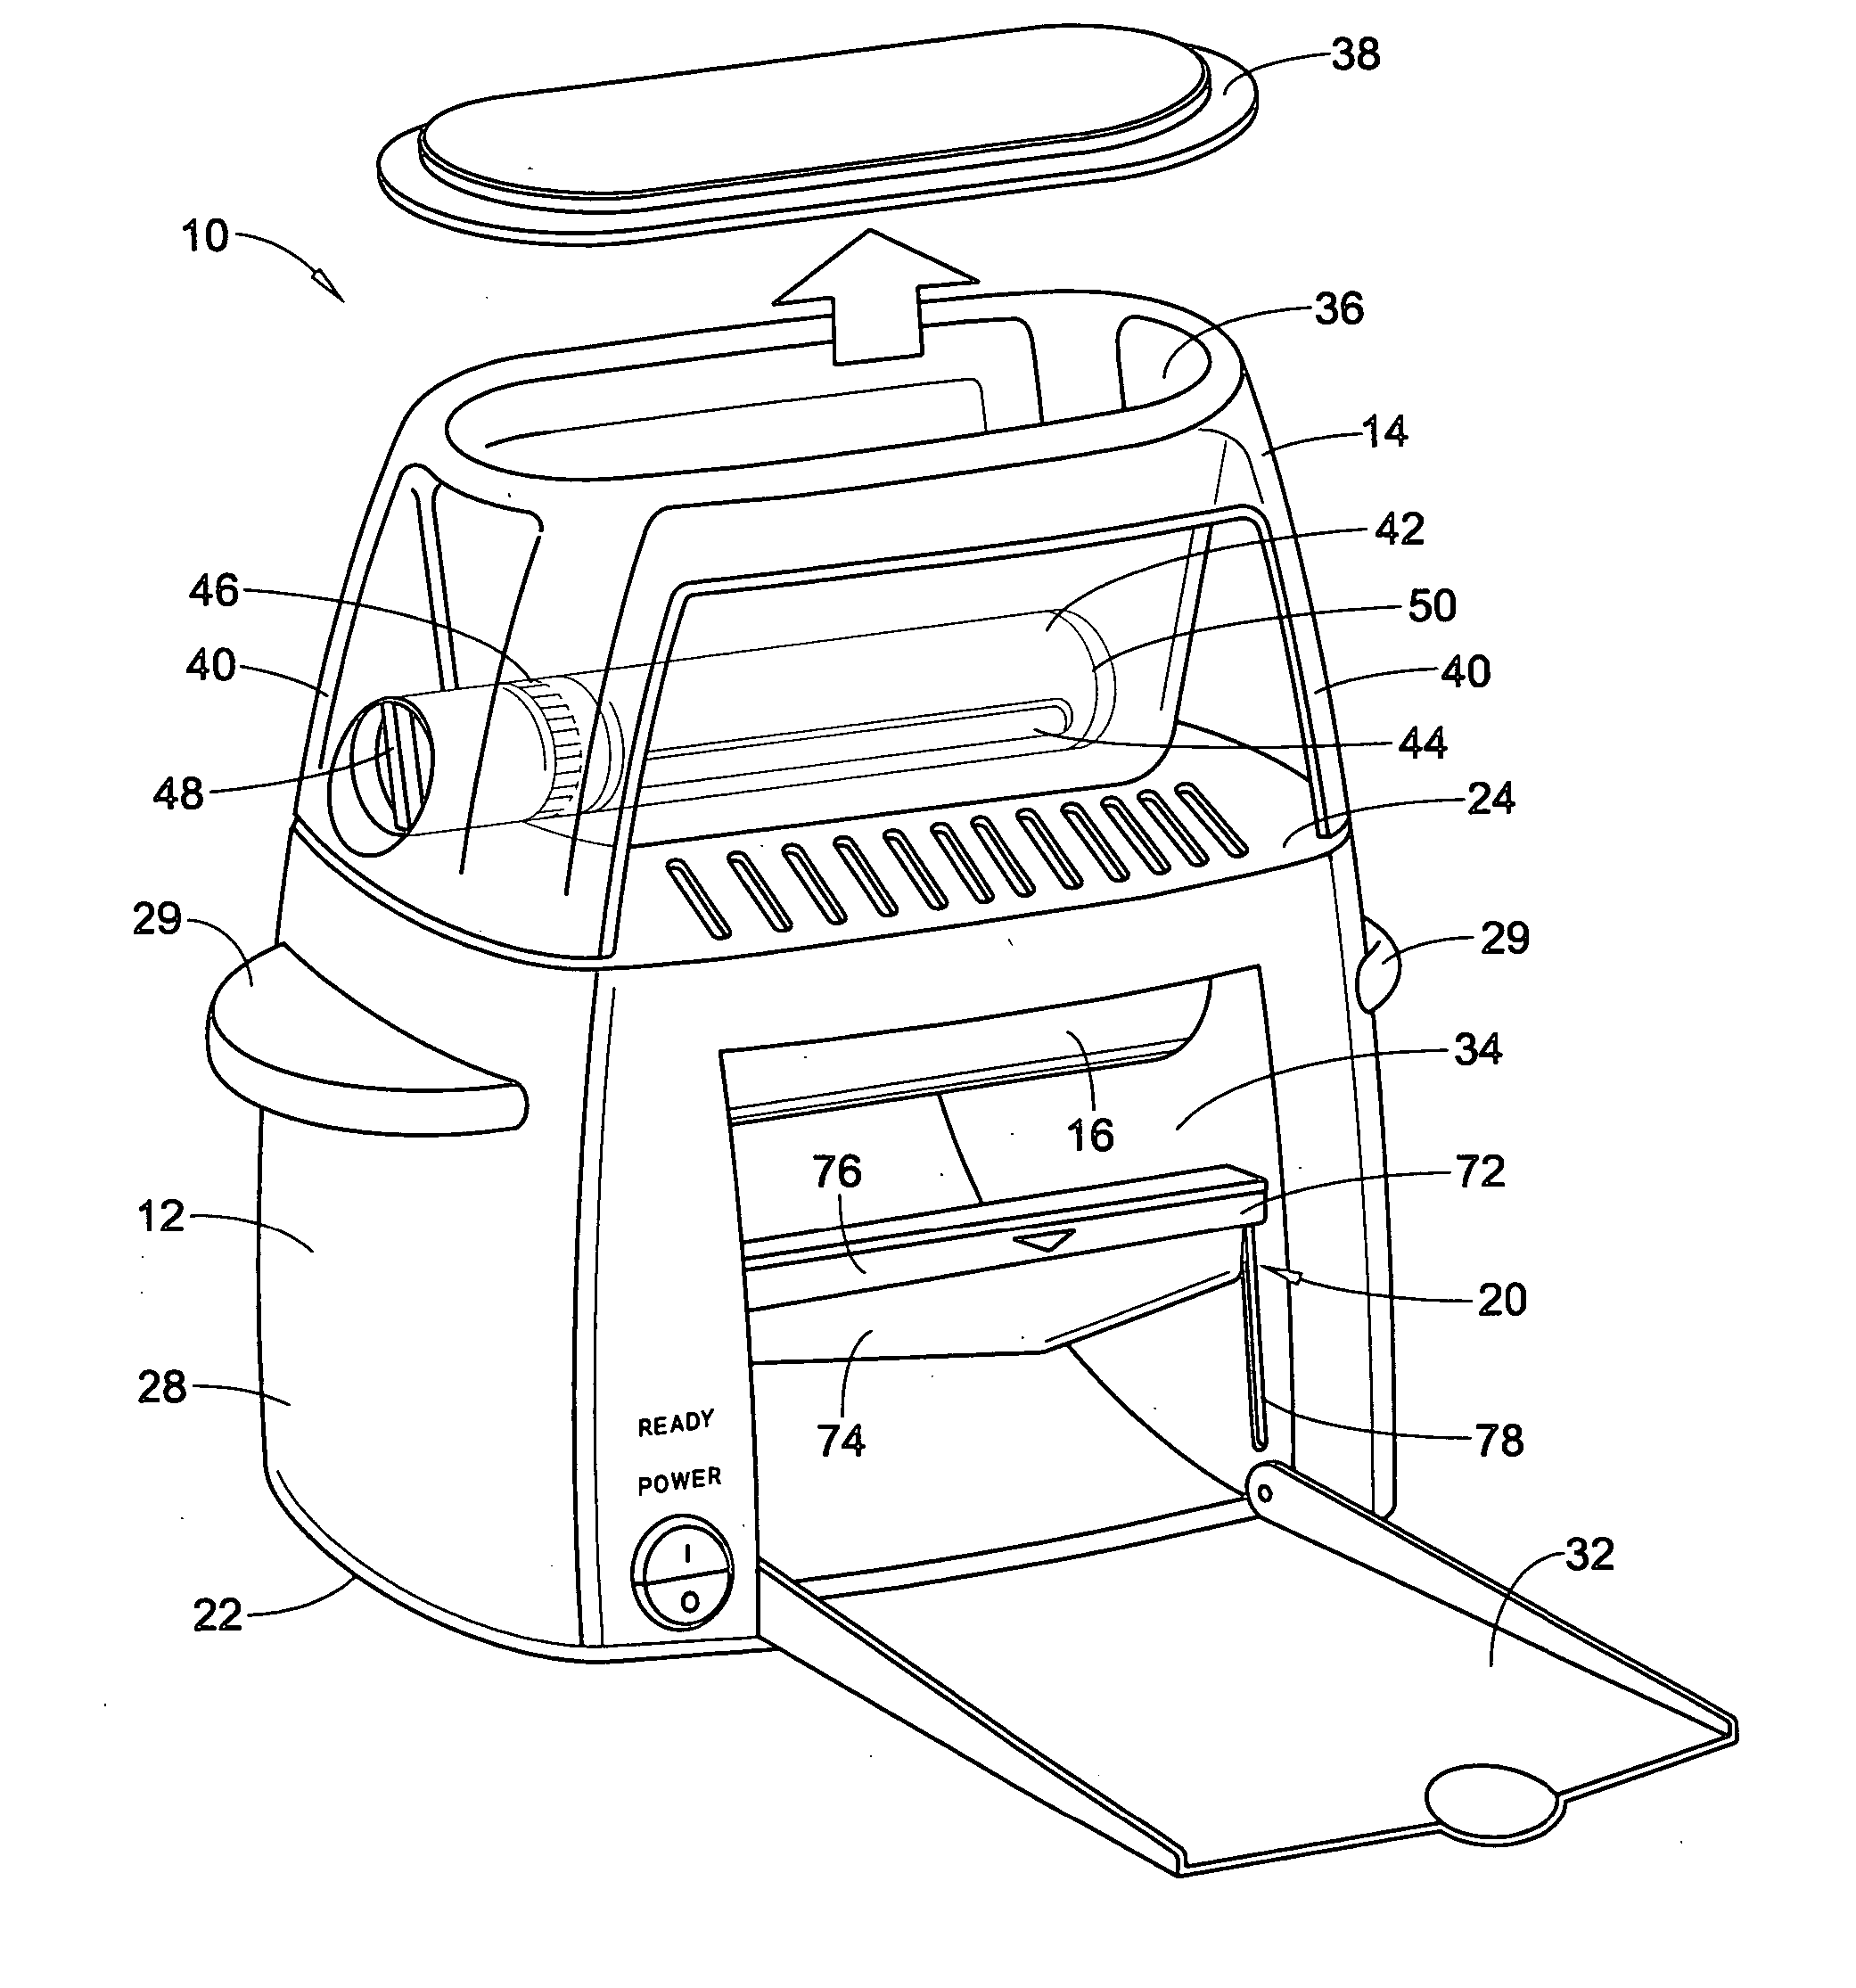 Continuous food cooker